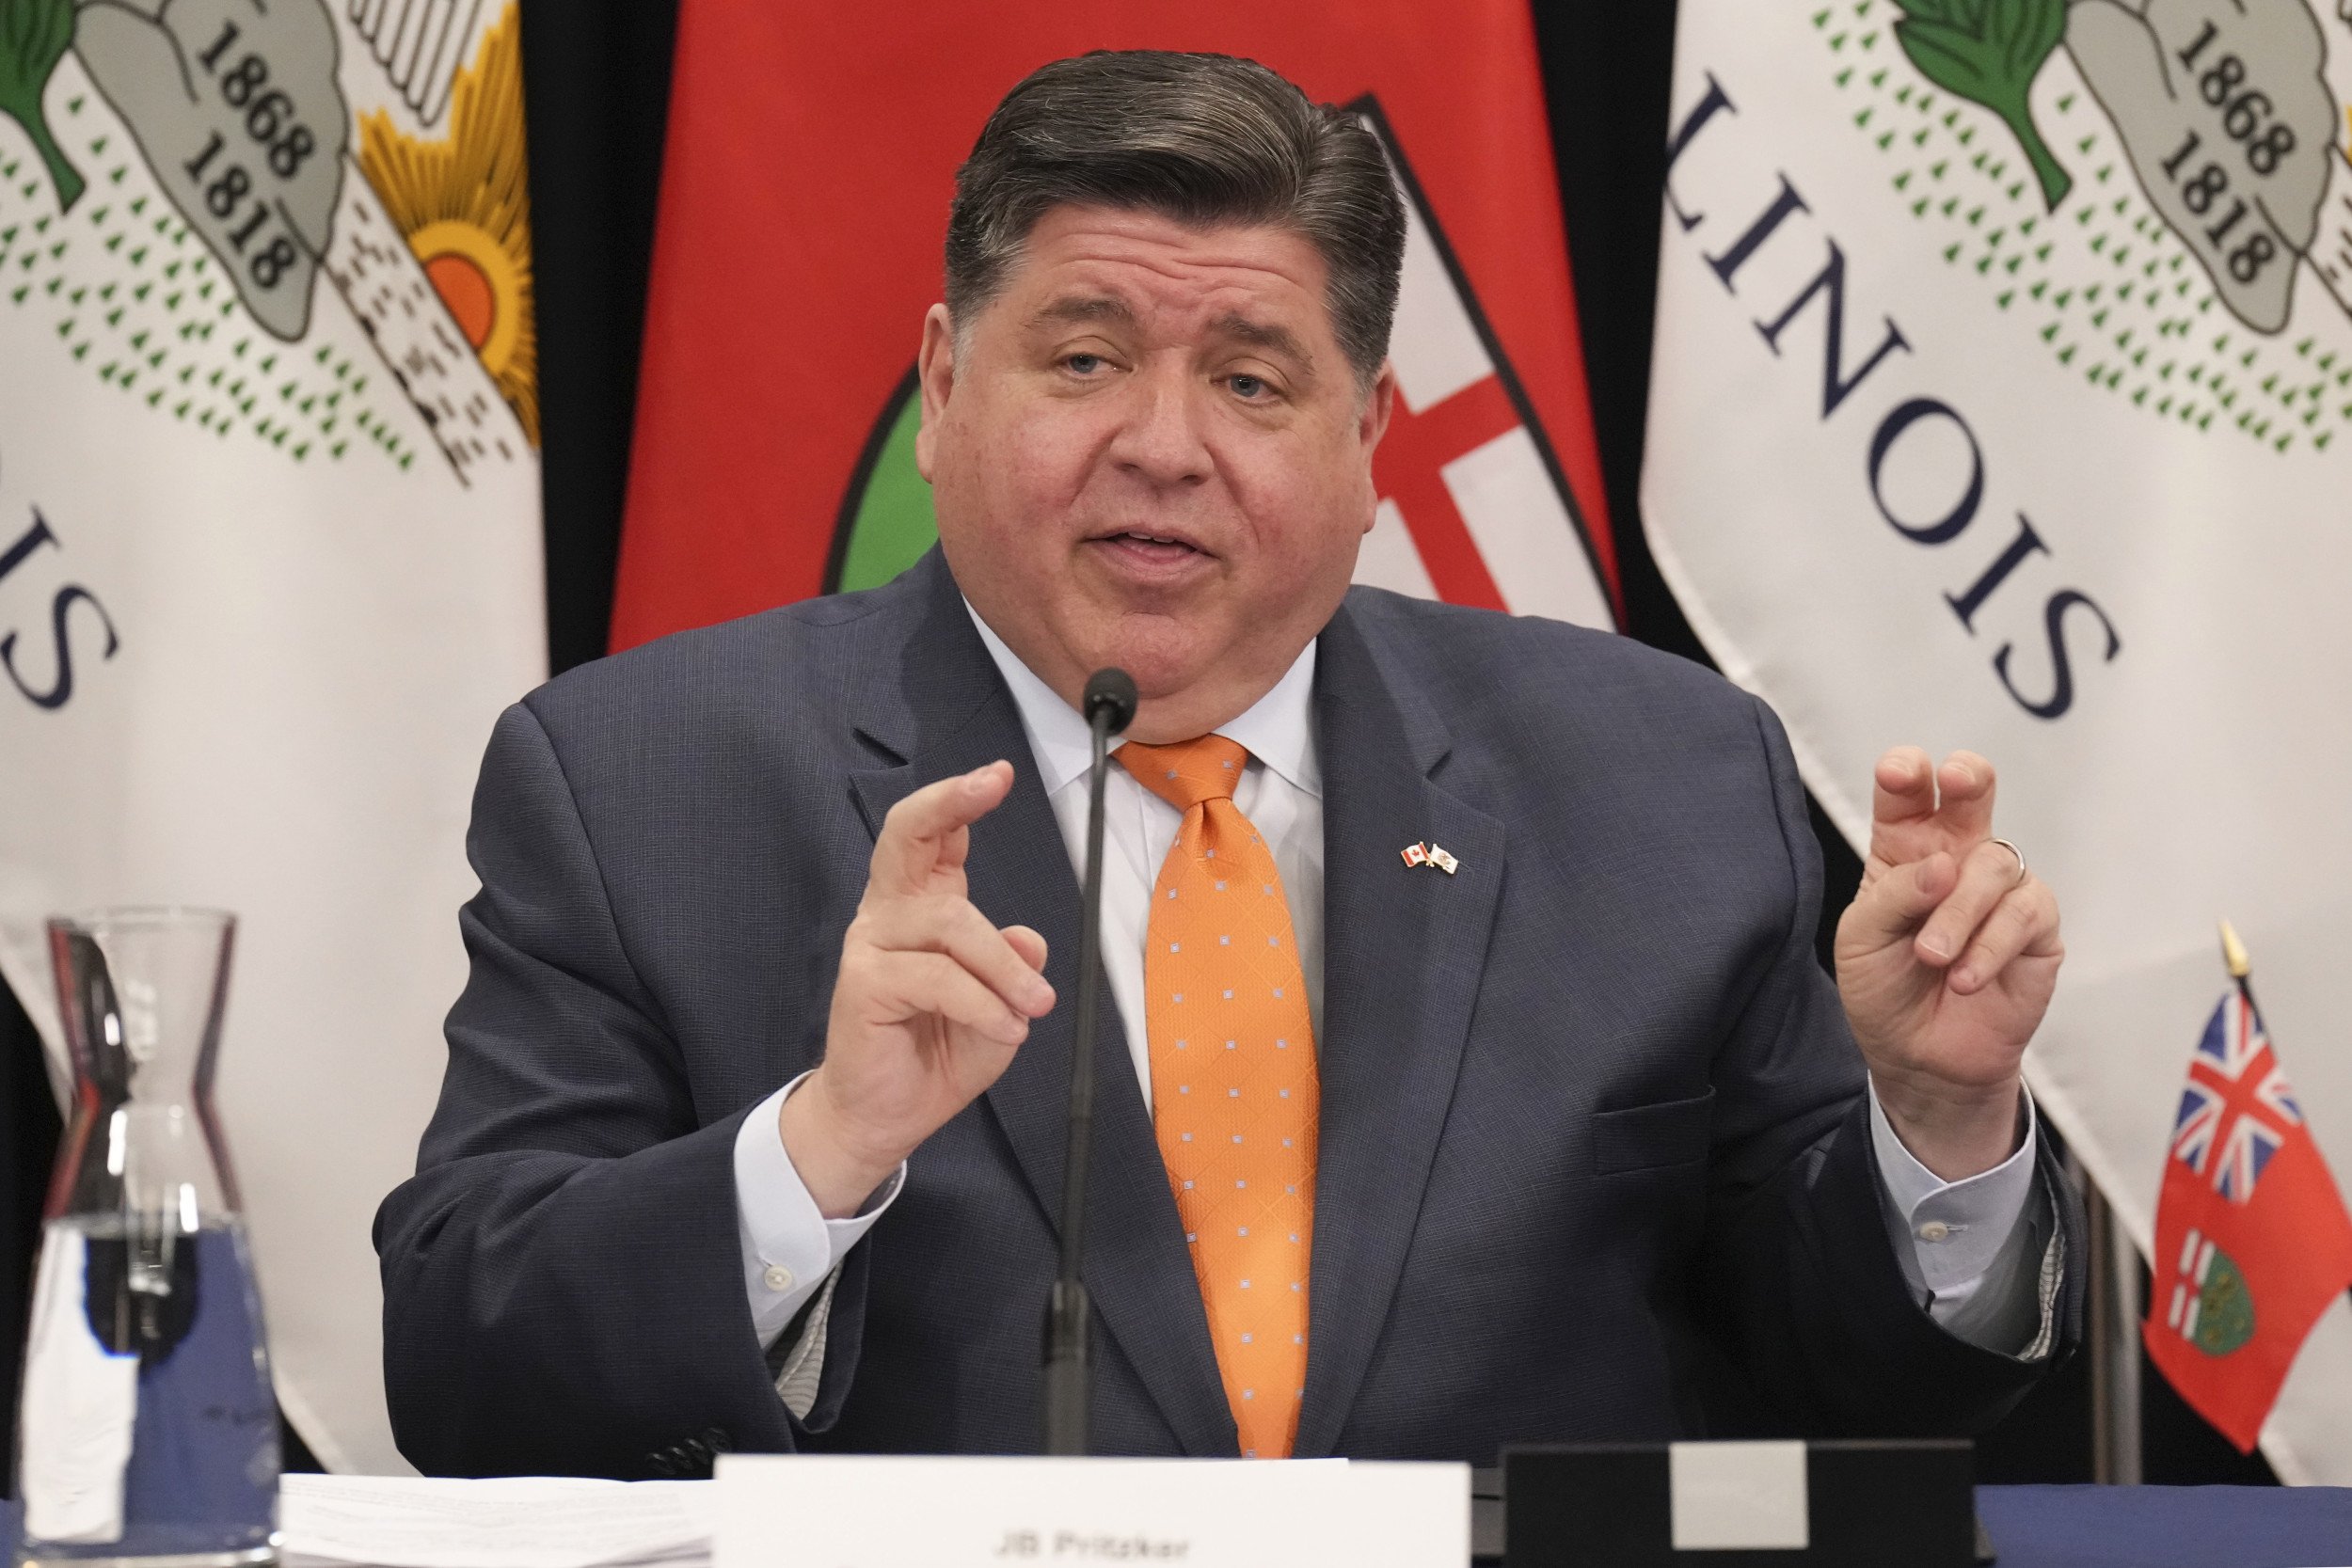 Pritzker for VP is a Good Choice for Winning Over Never-Trumpers | Opinion